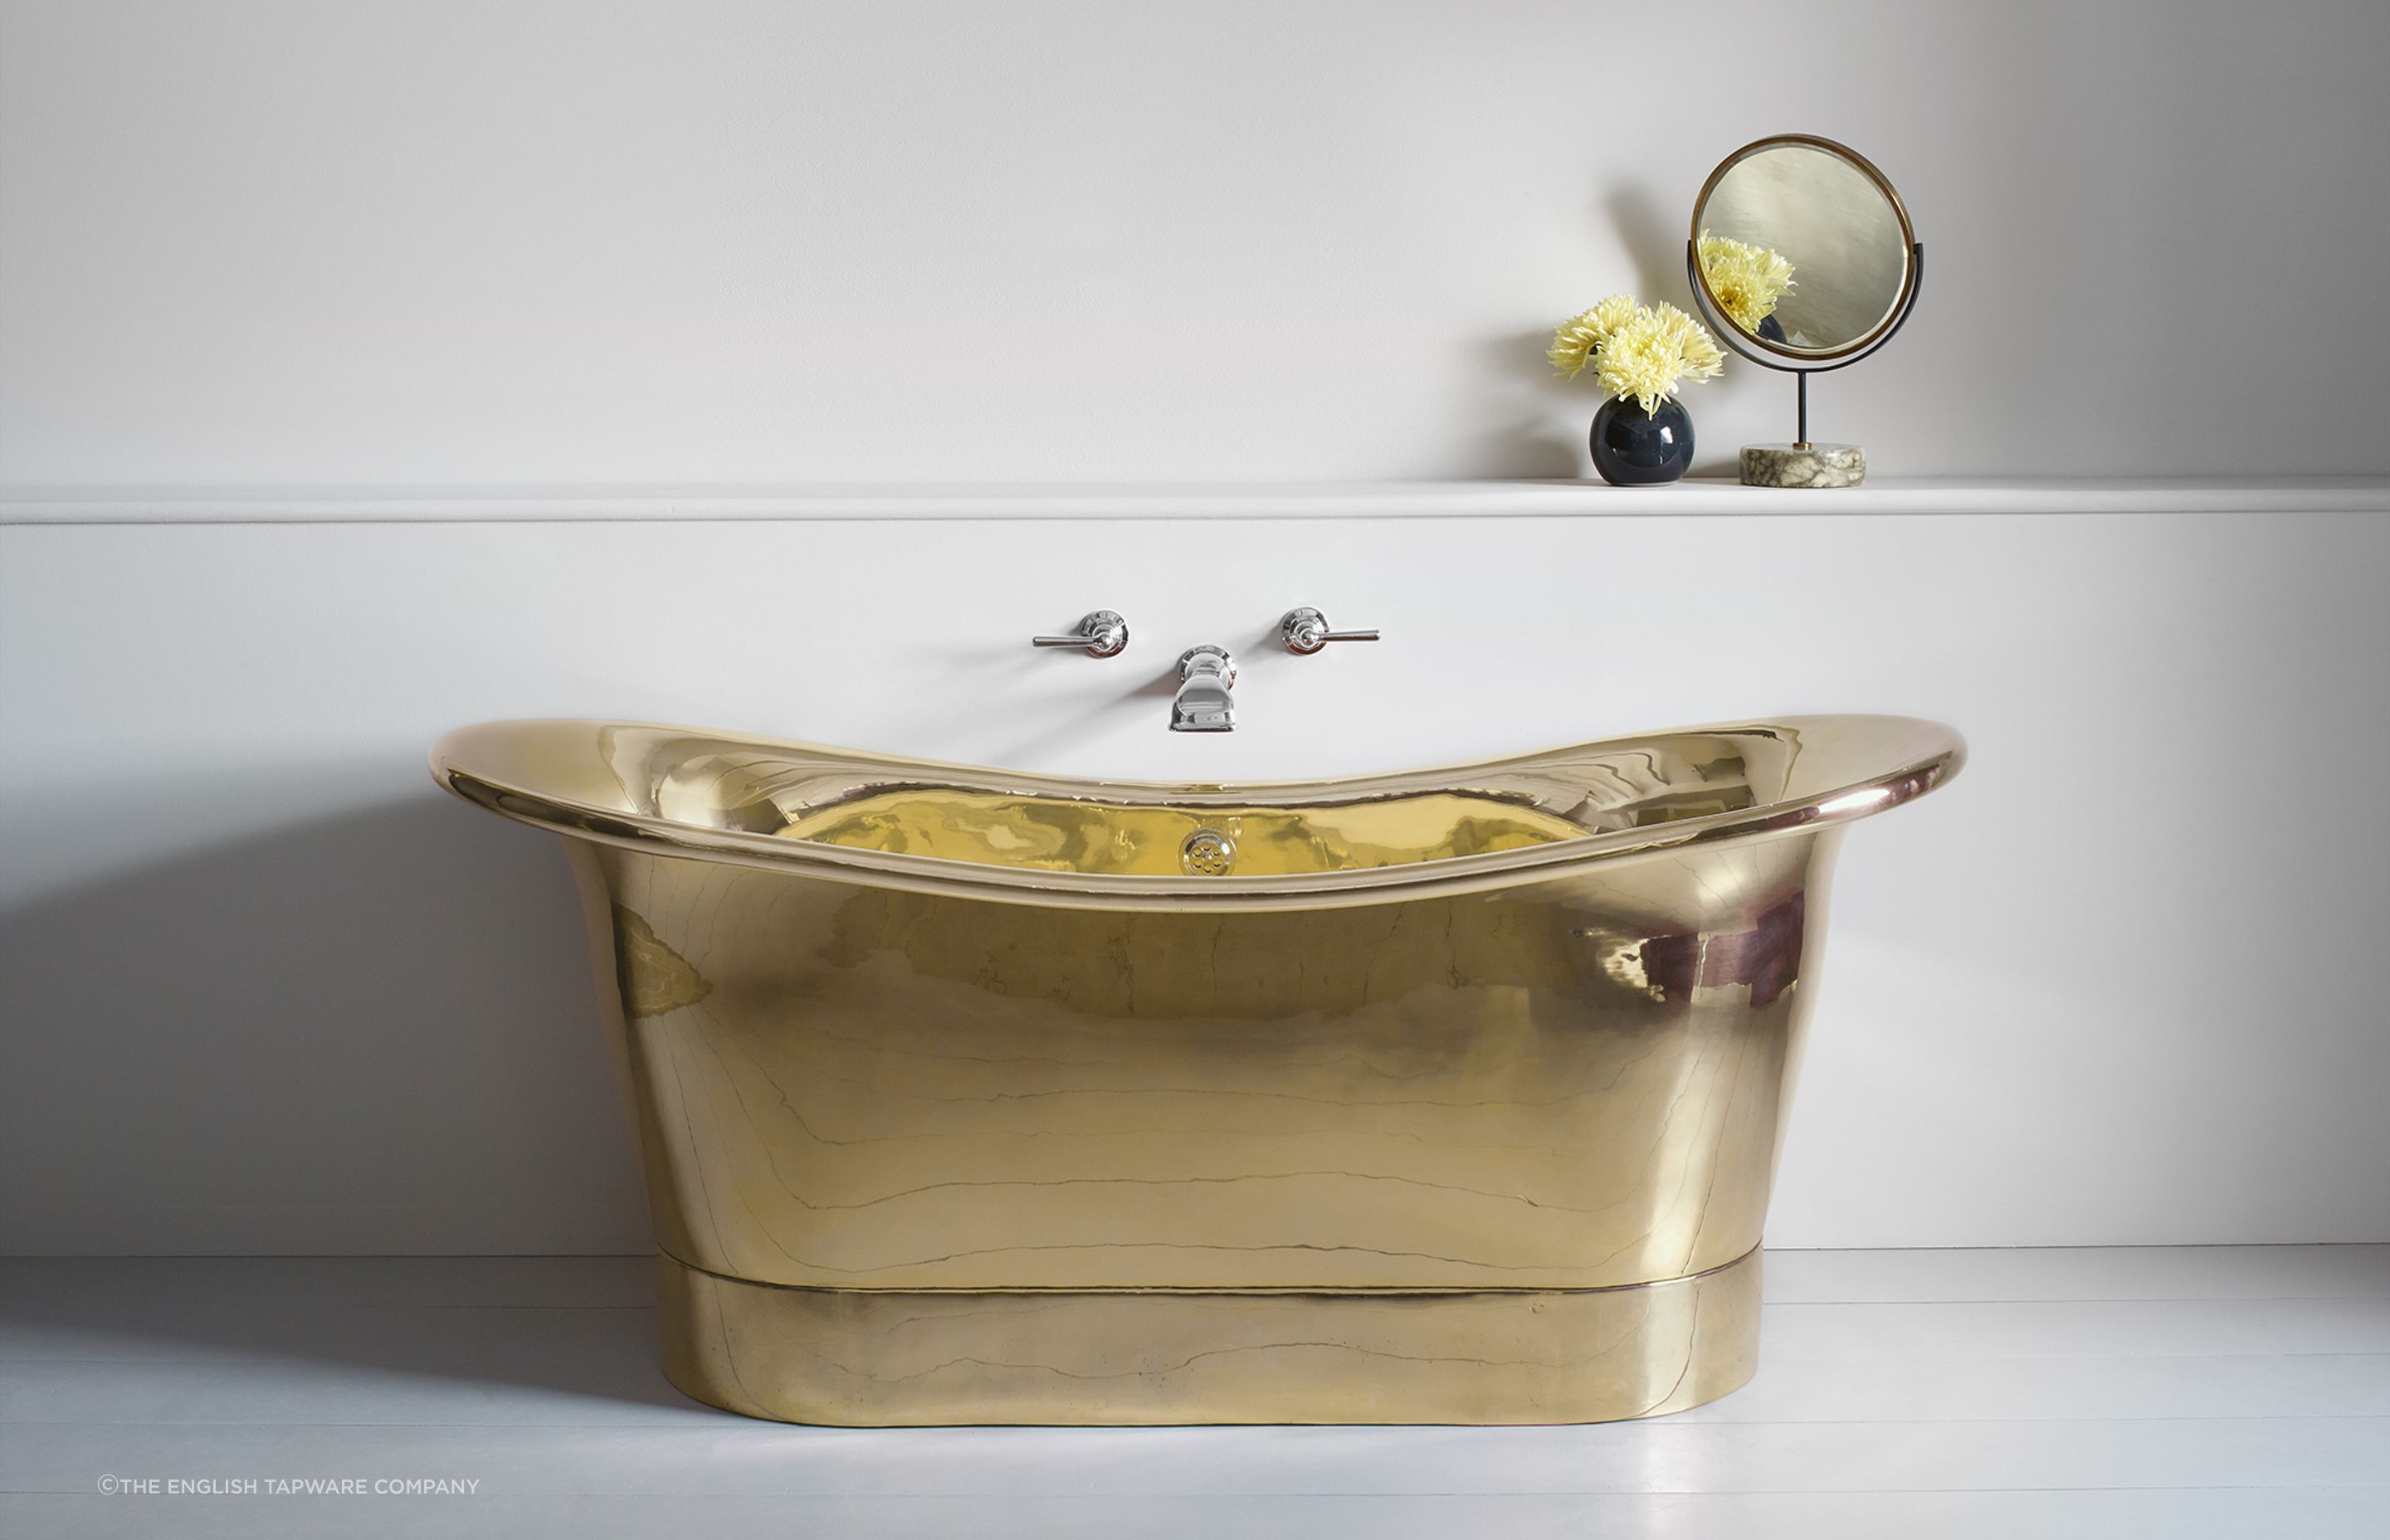 The stunning Martha Bath instantly draws the eye and is available in both brass and copper with a high polish finish.